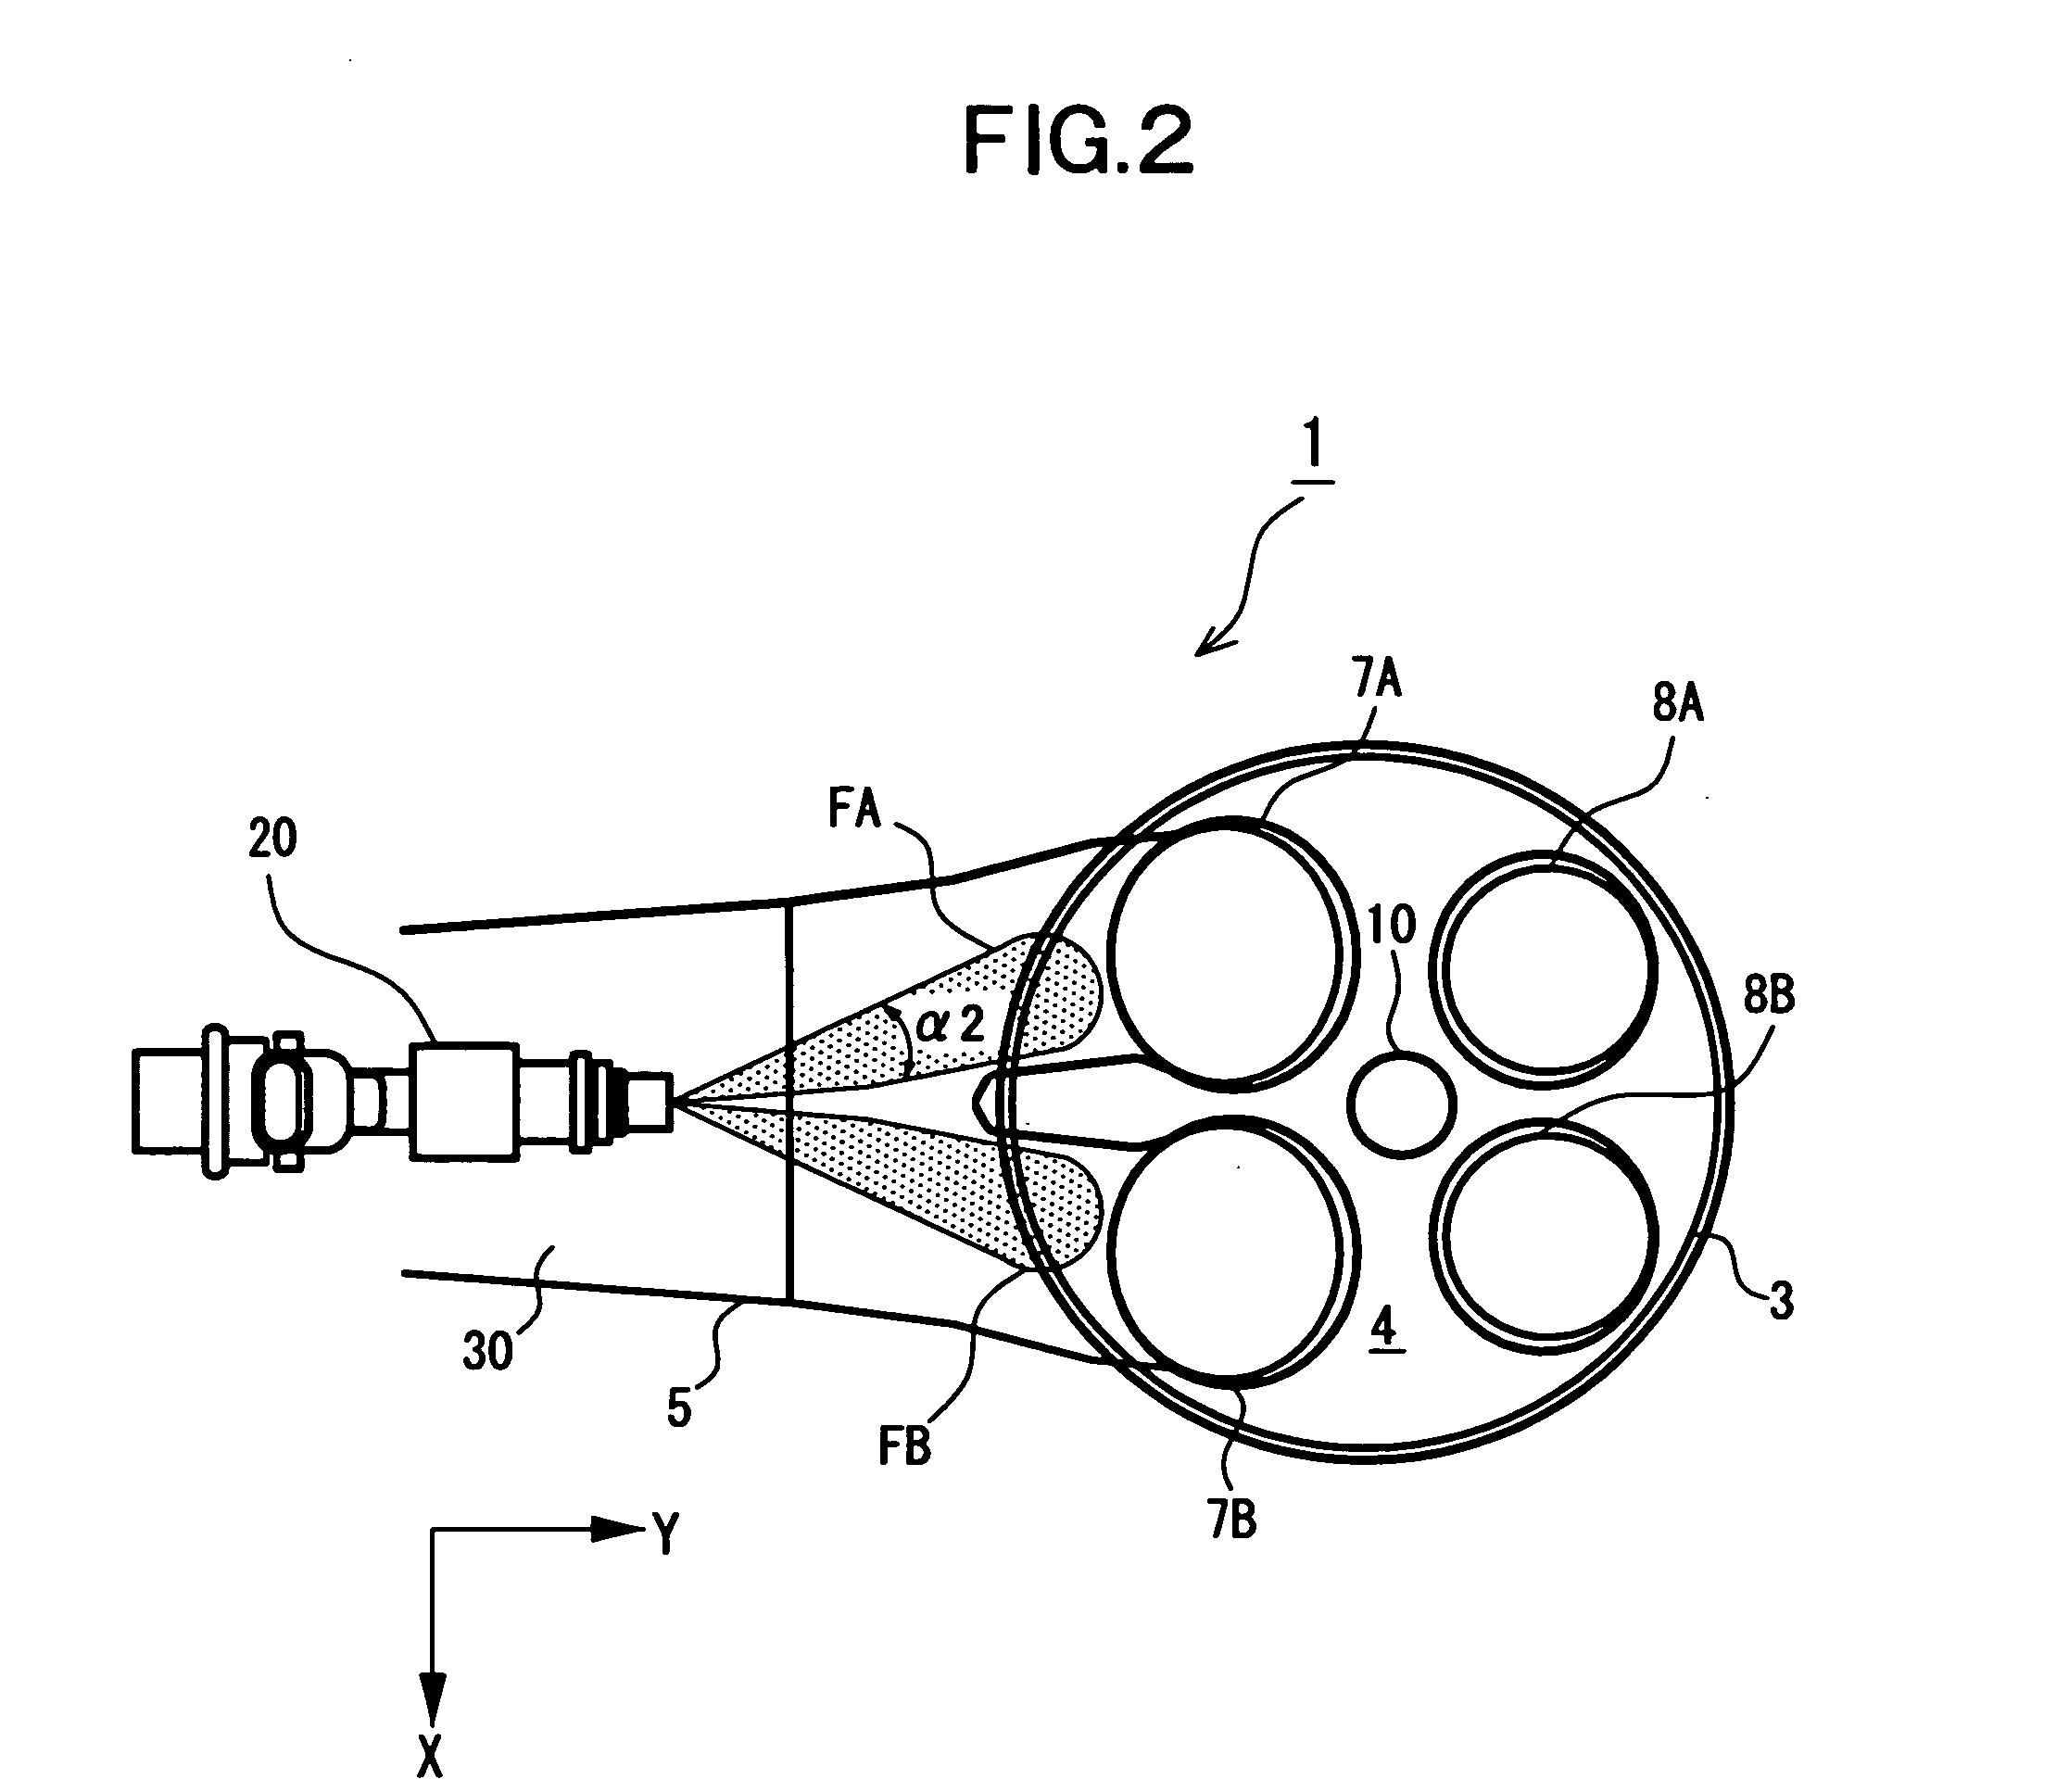 Fuel injection apparatus for and method of internal combustion engine, and fuel injection valve